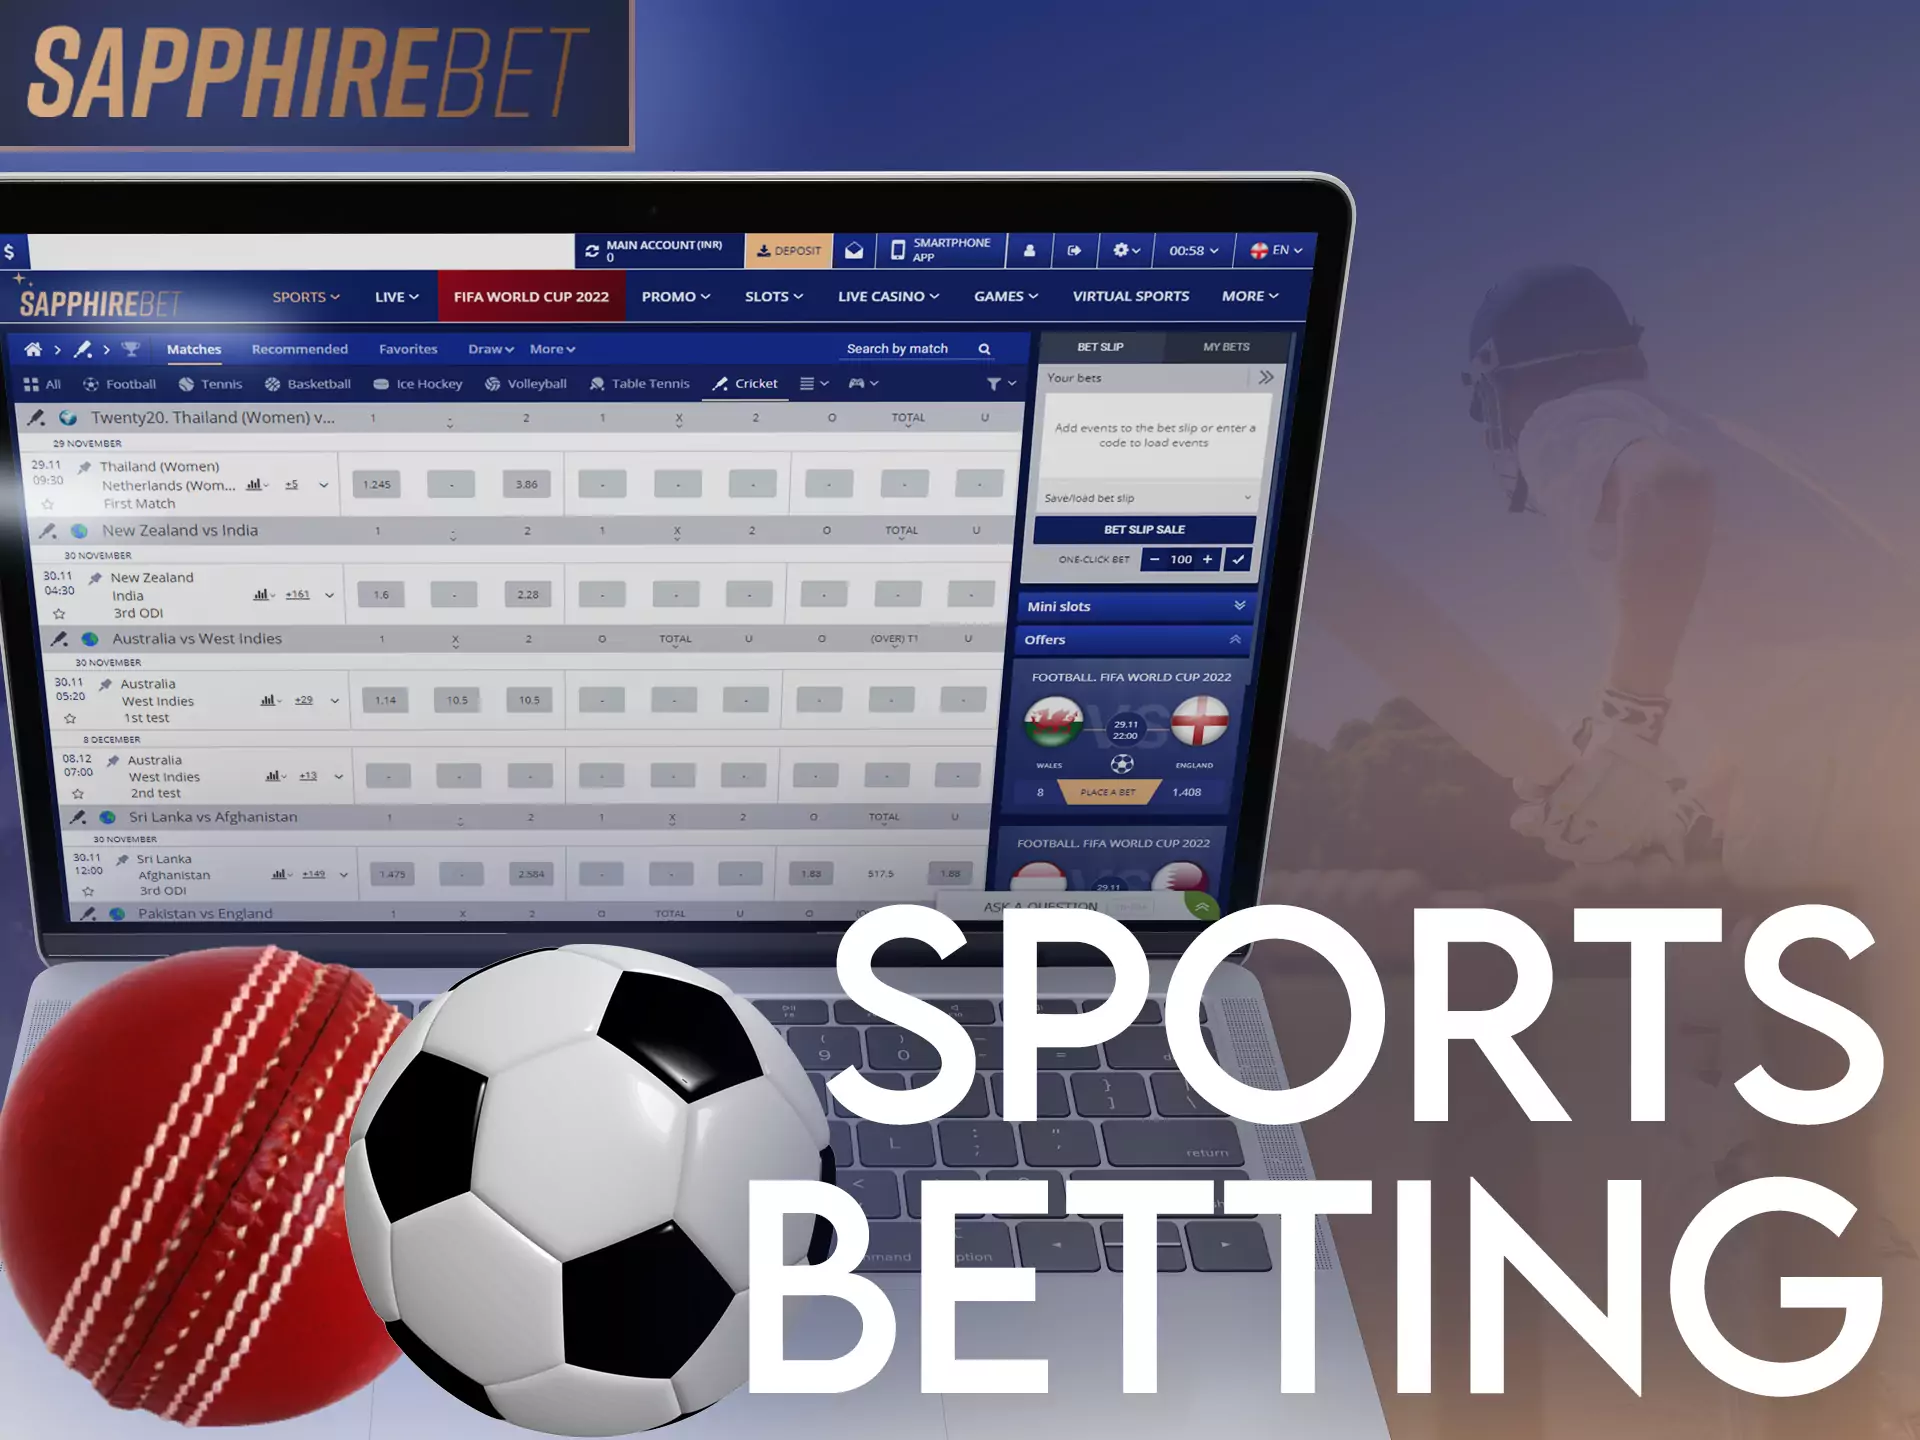 In Sapphirebet, place bets on various sports and enjoy the game.